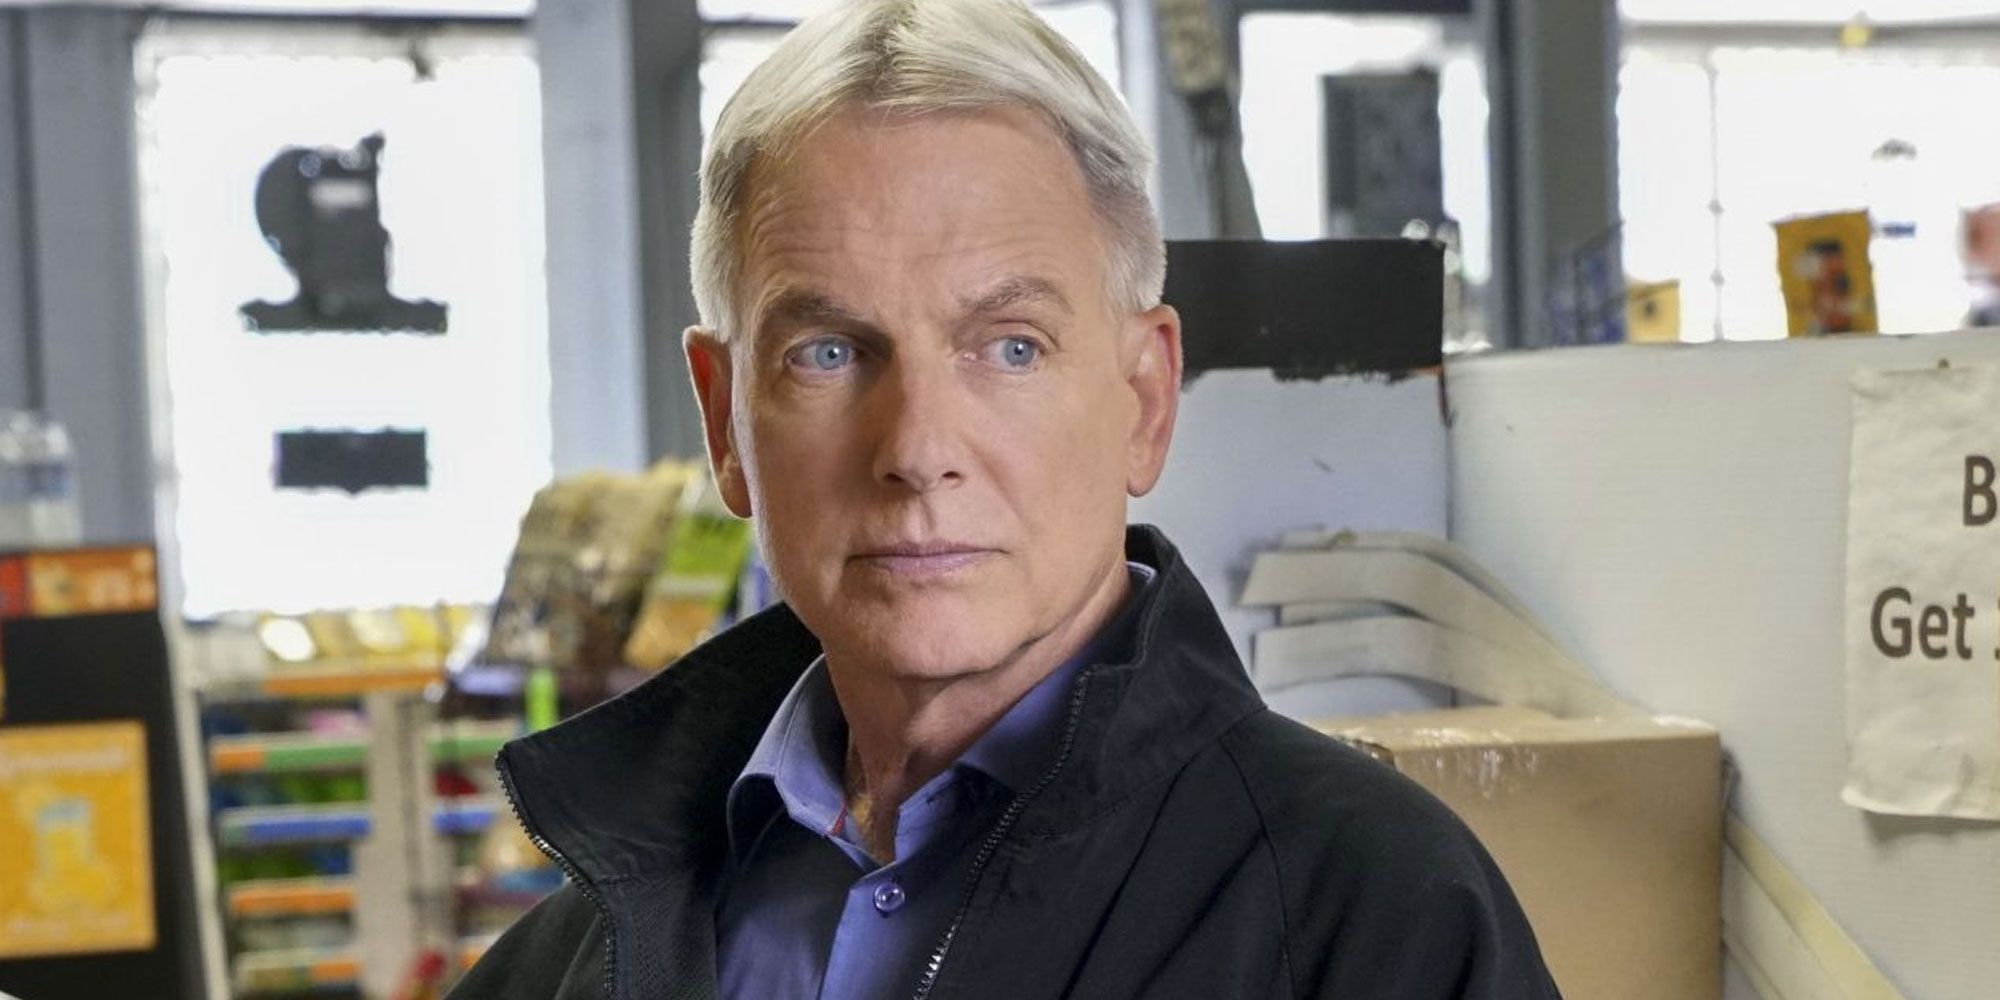 Leroy Jethro Gibbs looks serious in a convenience store in NCIS.